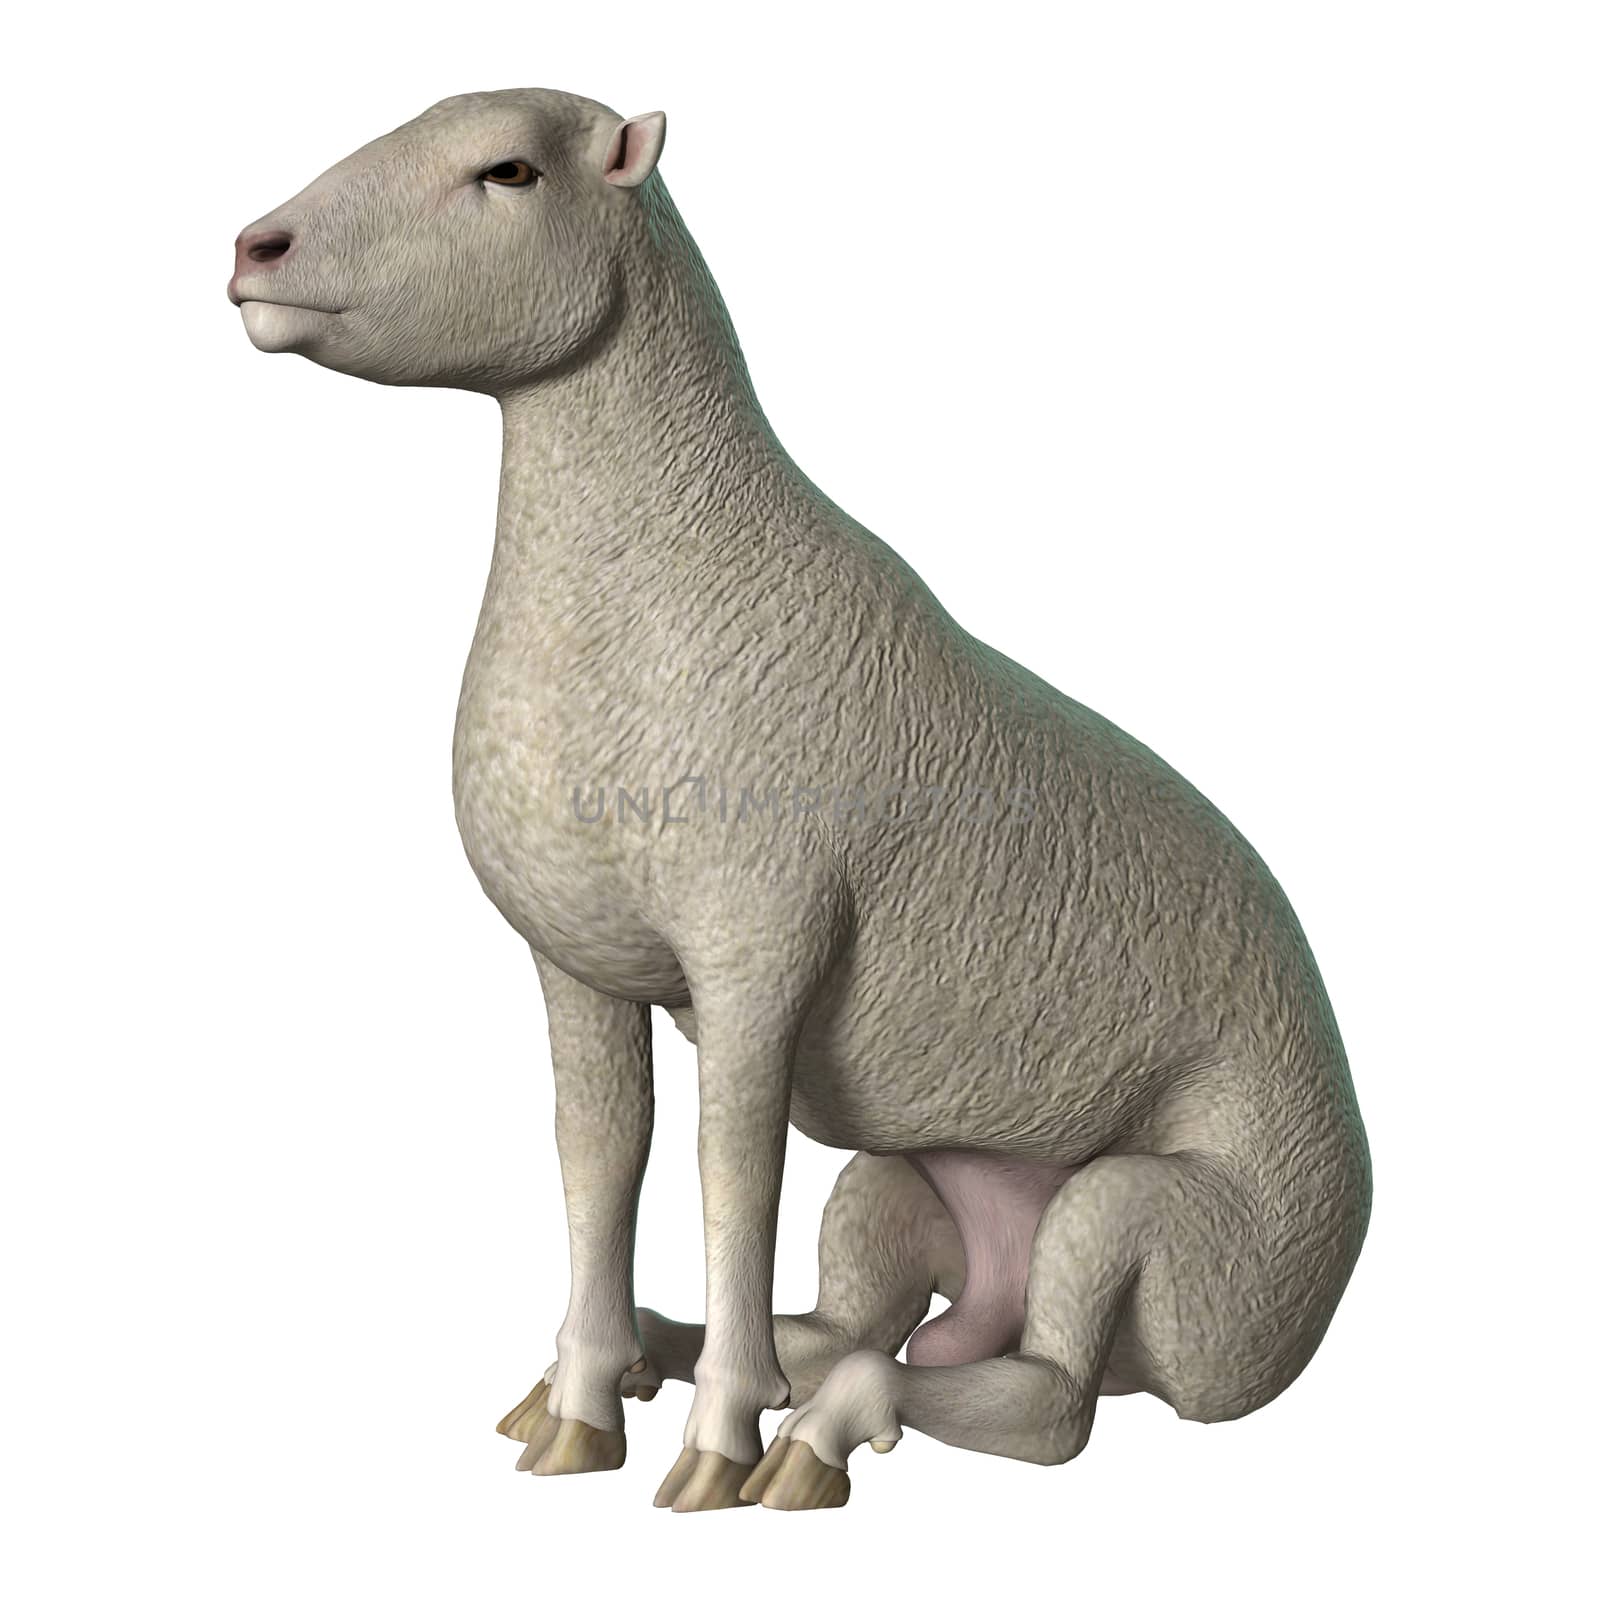 3D digital render of a sheep isolated on white background